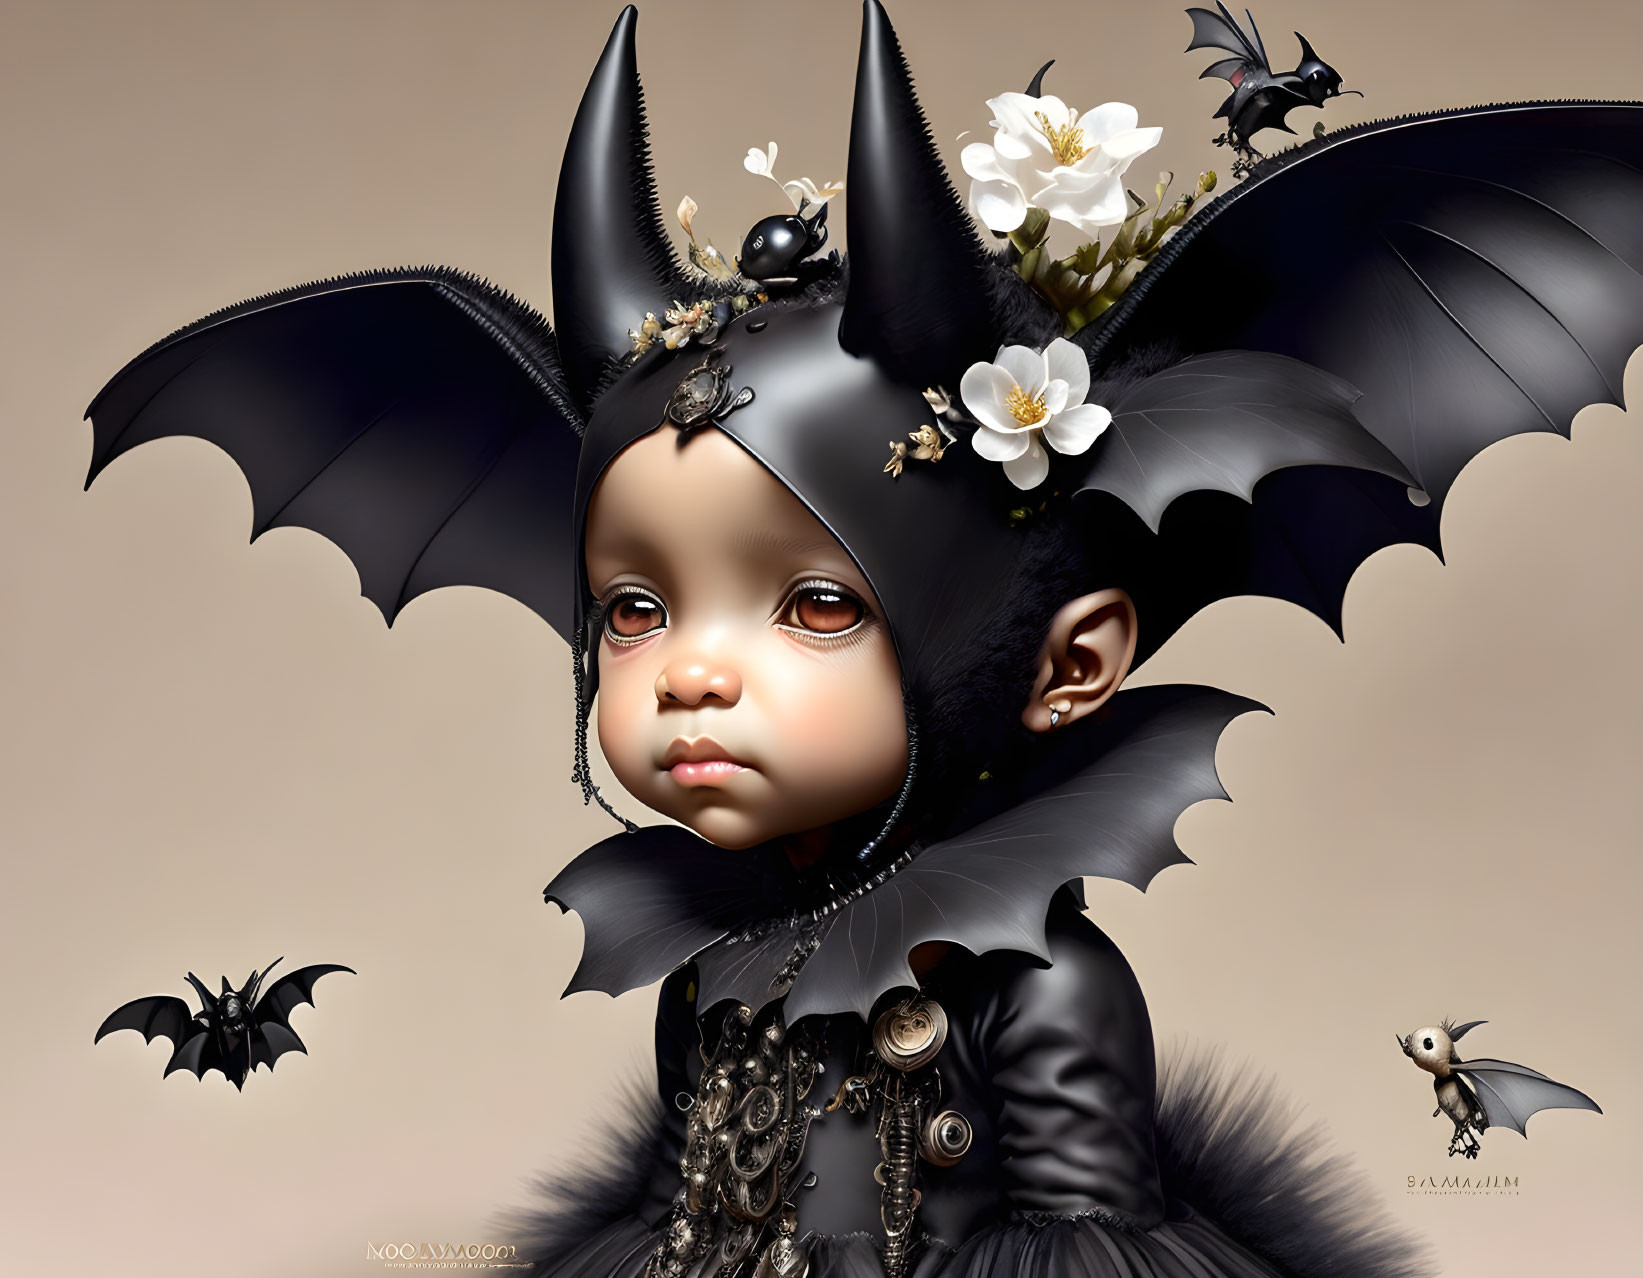 Child with bat-like wings in gothic outfit with flowers and bats